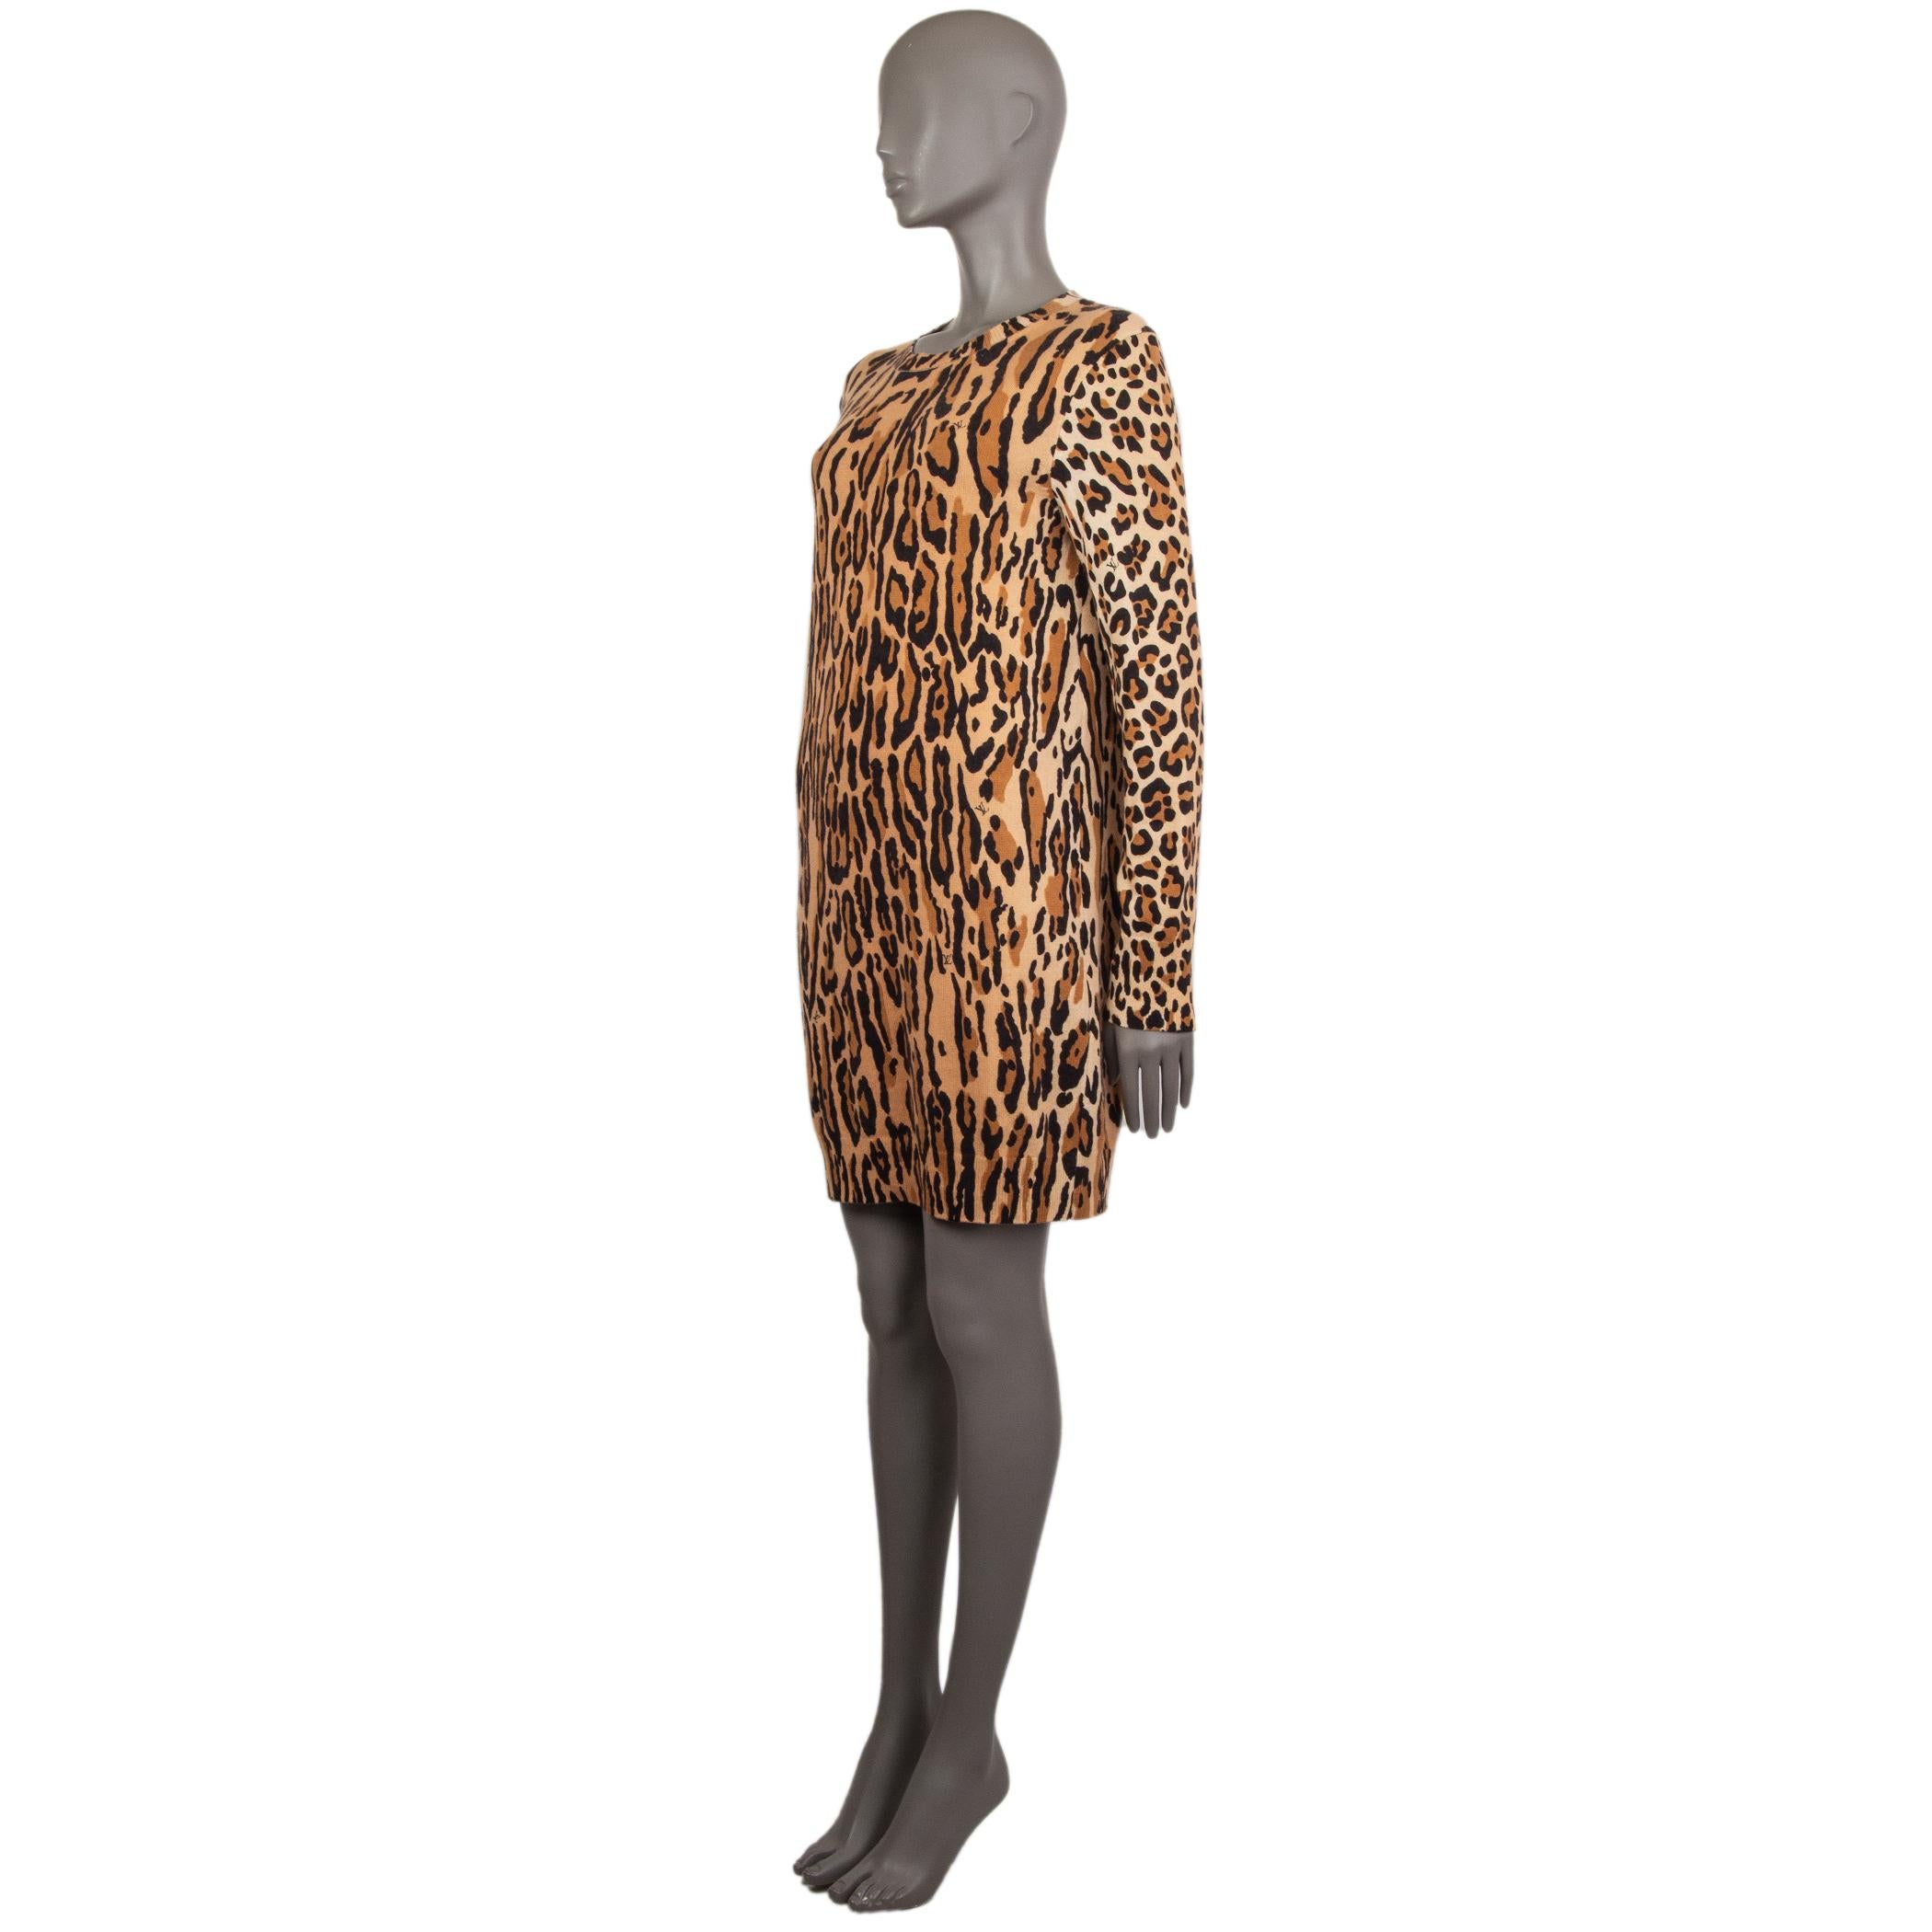 Louis Vuitton leopard-print sweater dress in black, camel and beige cashmere (100%). WIth round neck and ribbed details. Might have been worn and is in virtually new condition. 

Tag Size S
Size S
Shoulder Width 42cm (16.4in)
Bust 104cm (40.6in) to